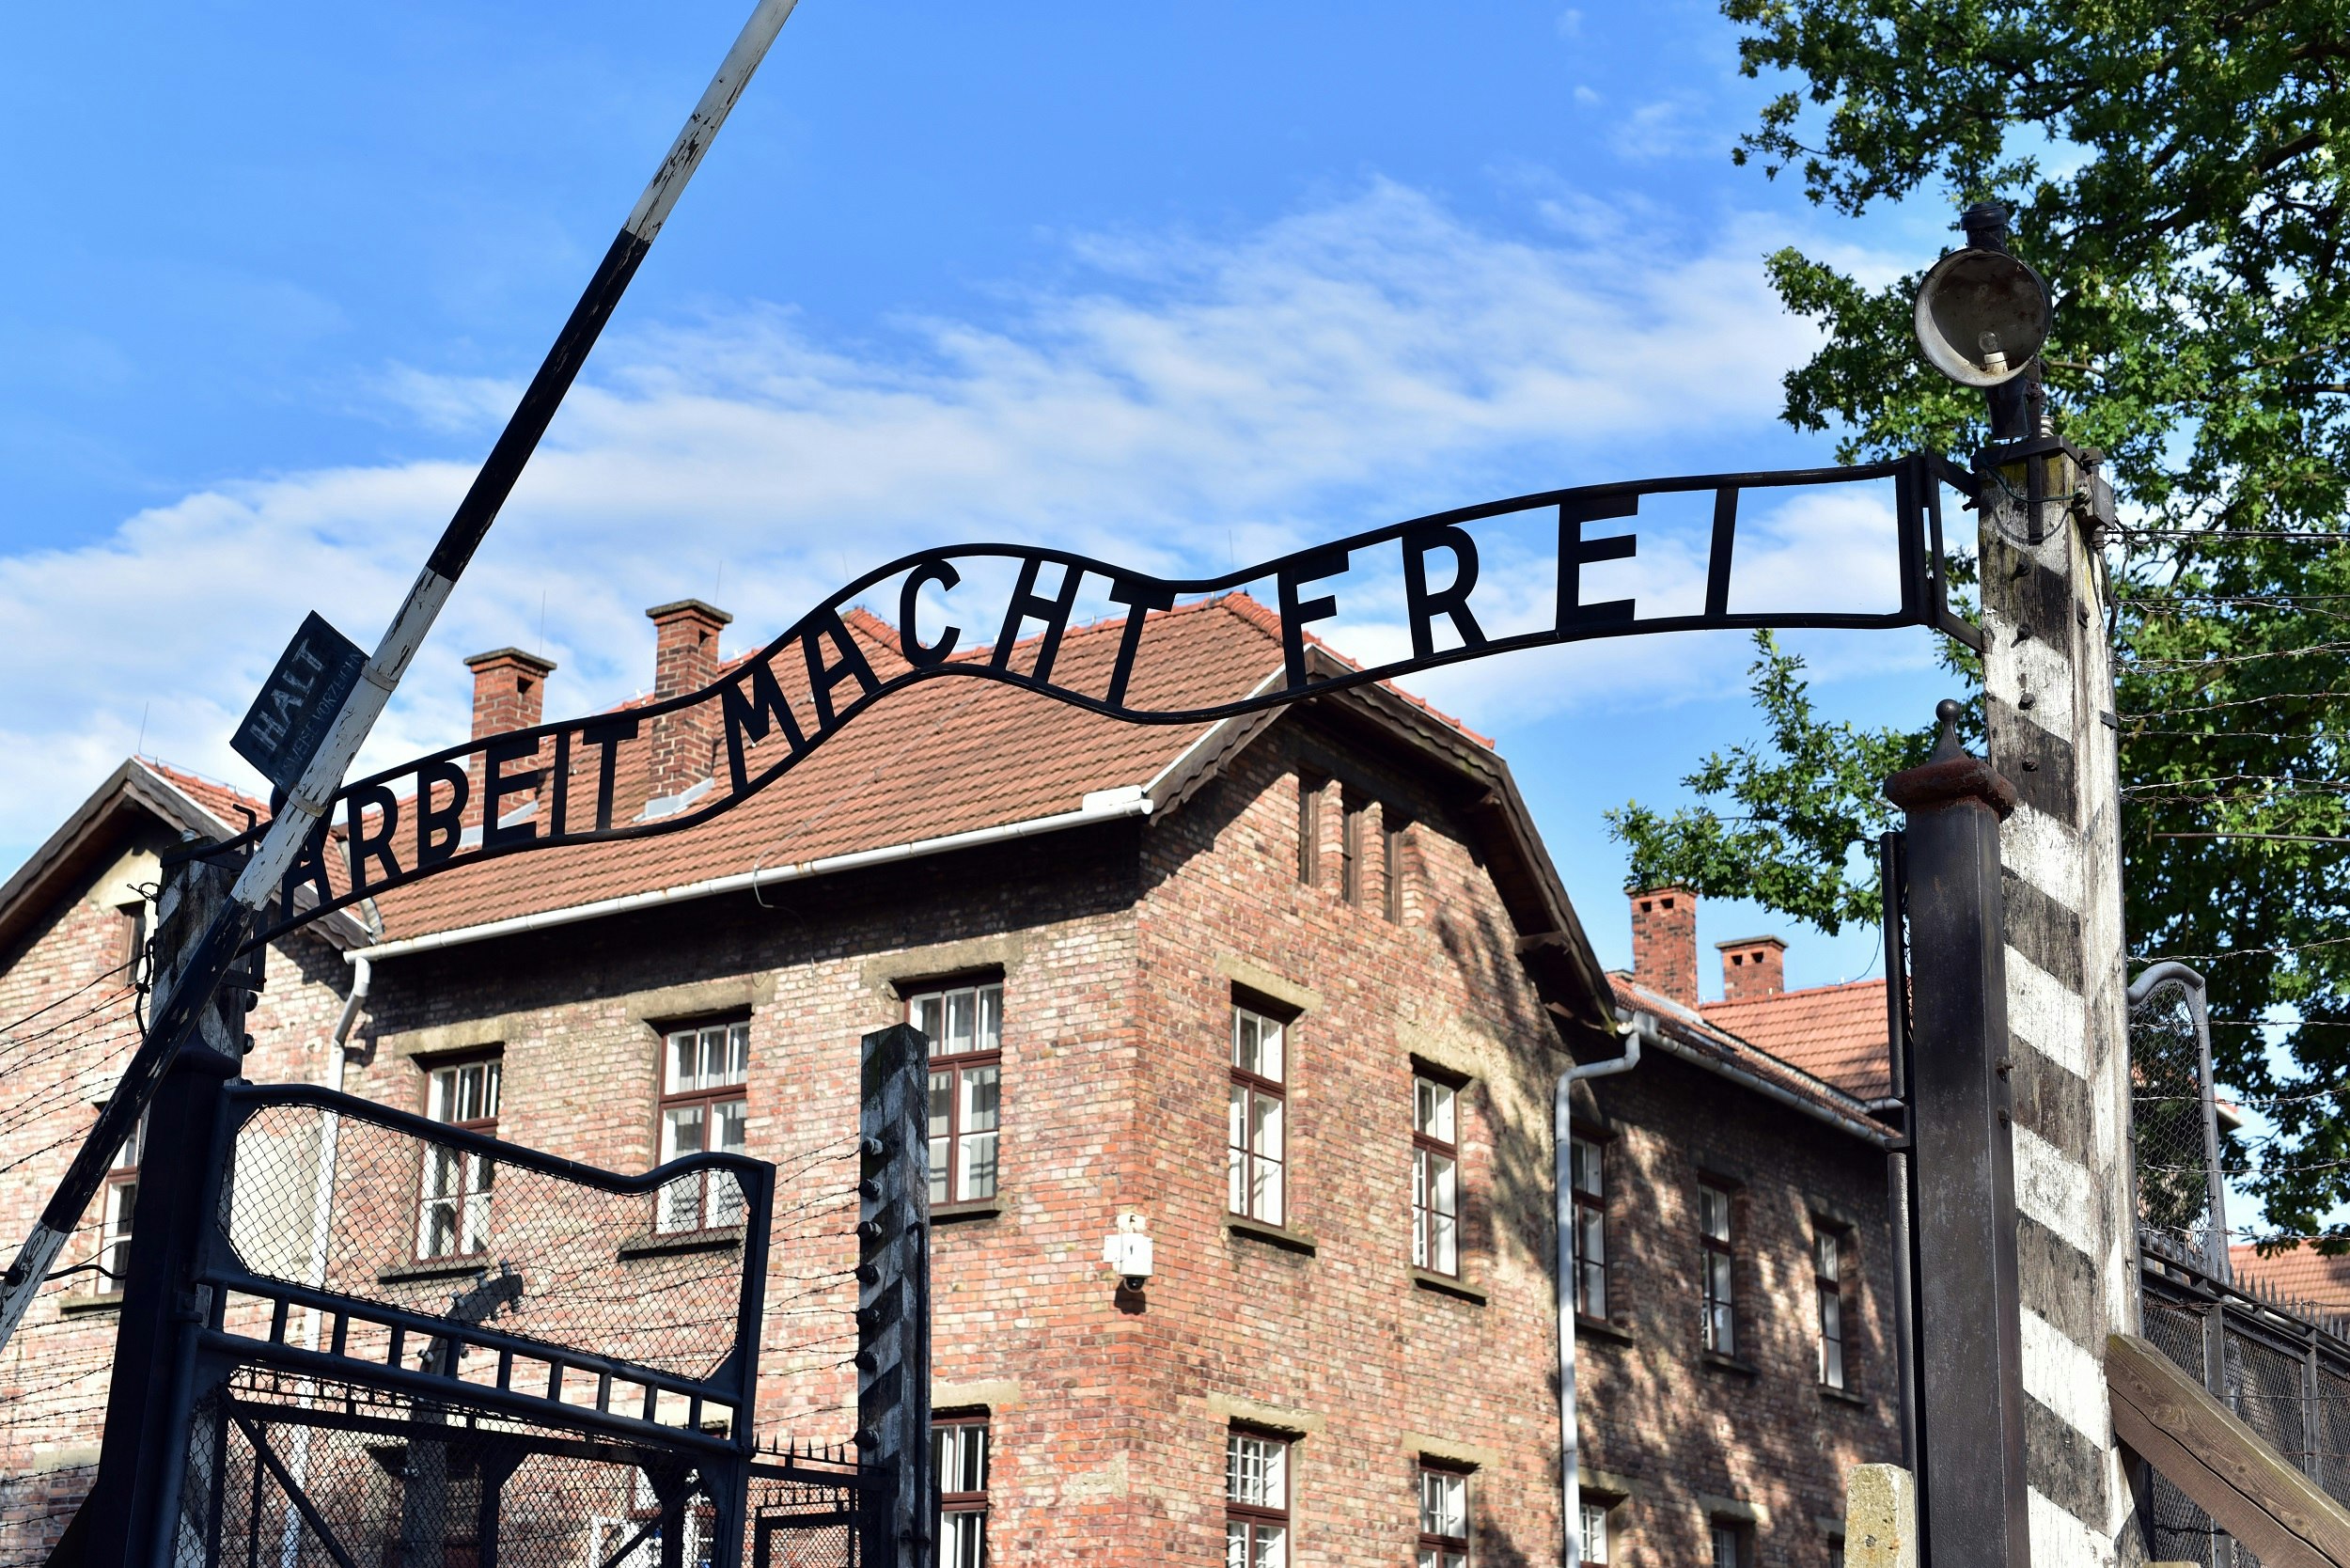 Iron letters above a gateway spell out Arbeit Macht Frei (work makes you free). A two-storey red-brick building is in the background